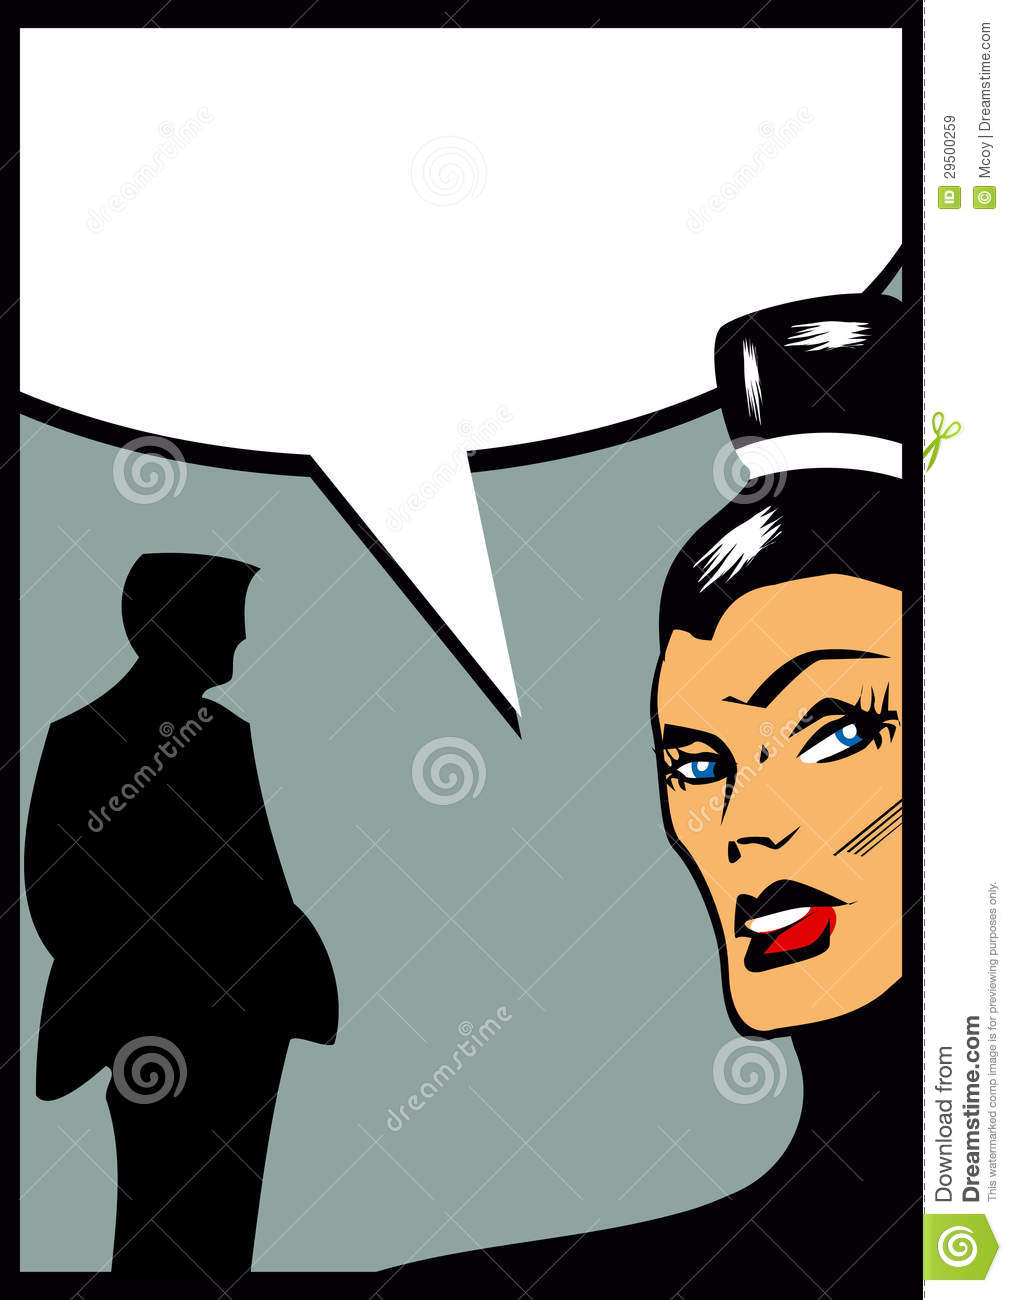 Couple Angry Woman Talking With Man Silhouette Royalty Free Stock